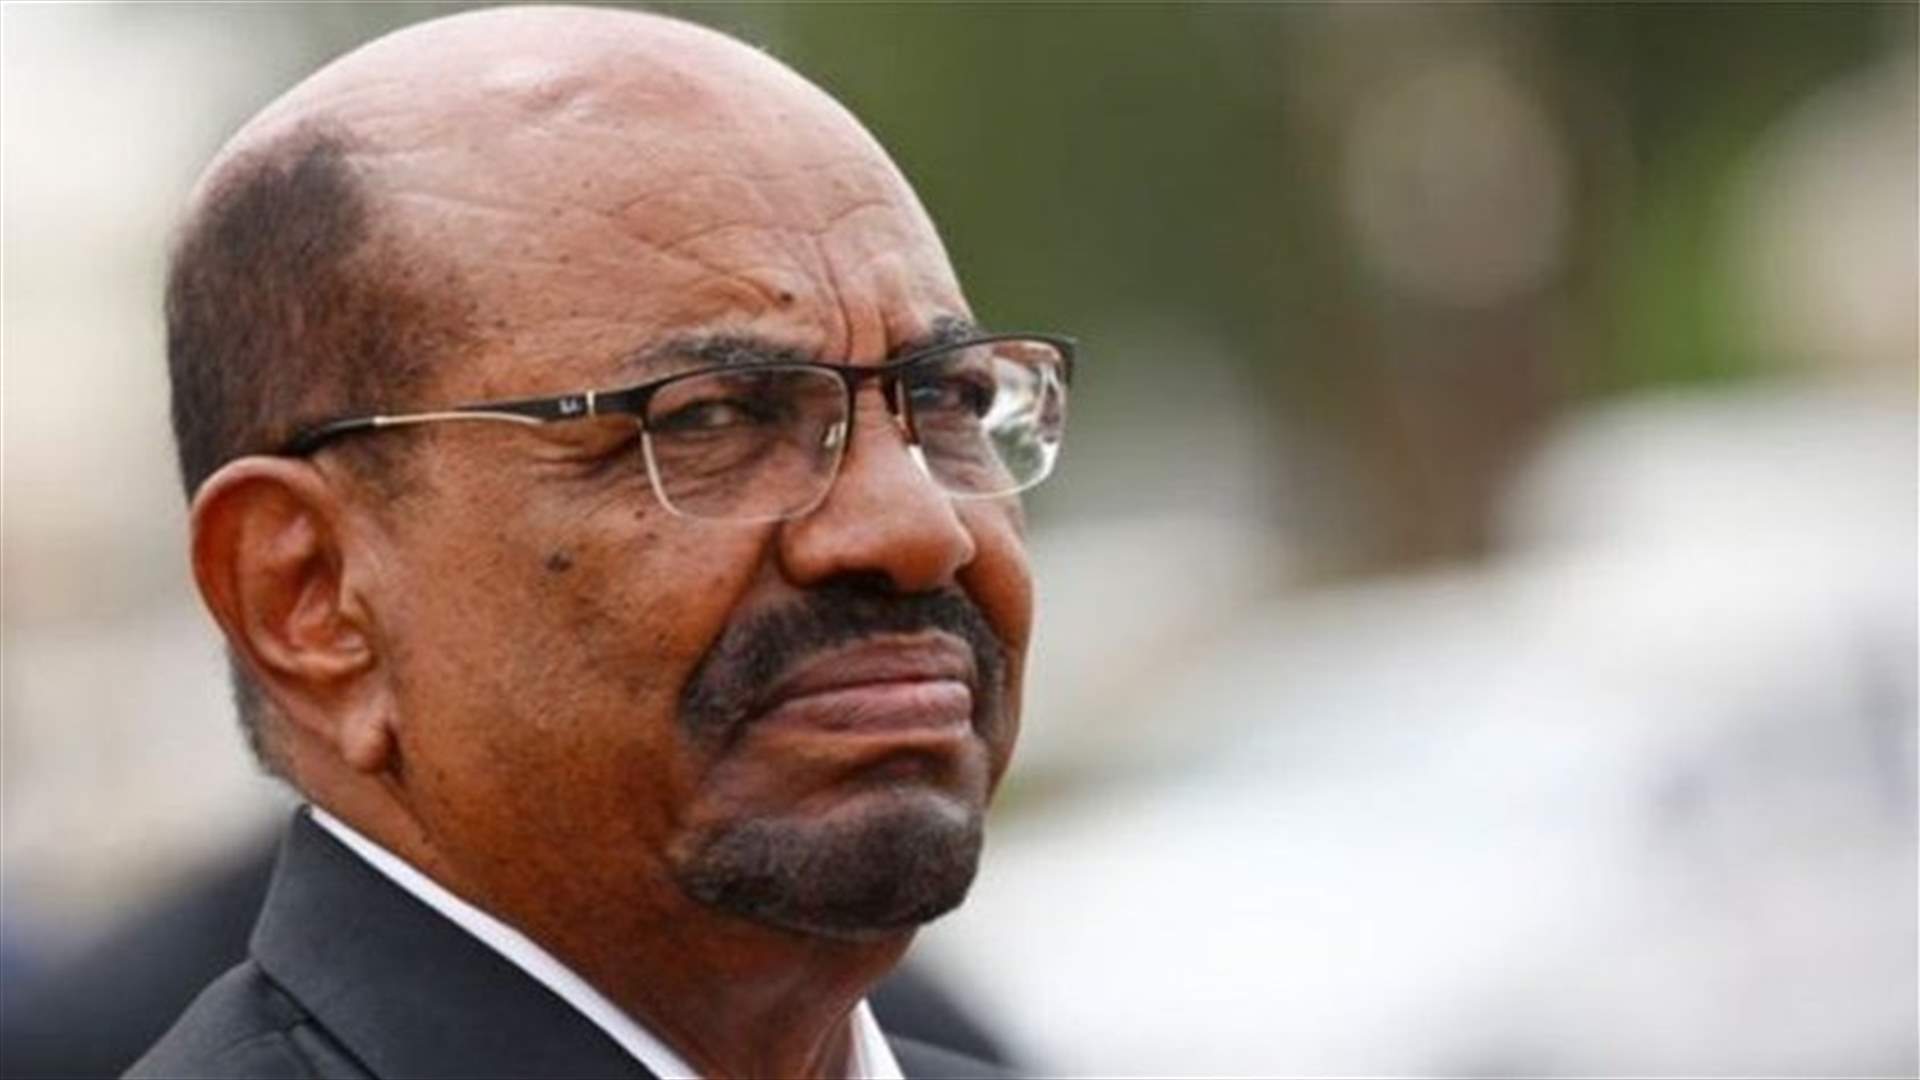 Sudan&#39;s ousted Bashir told investigators he got millions from Saudi Arabia - court witness